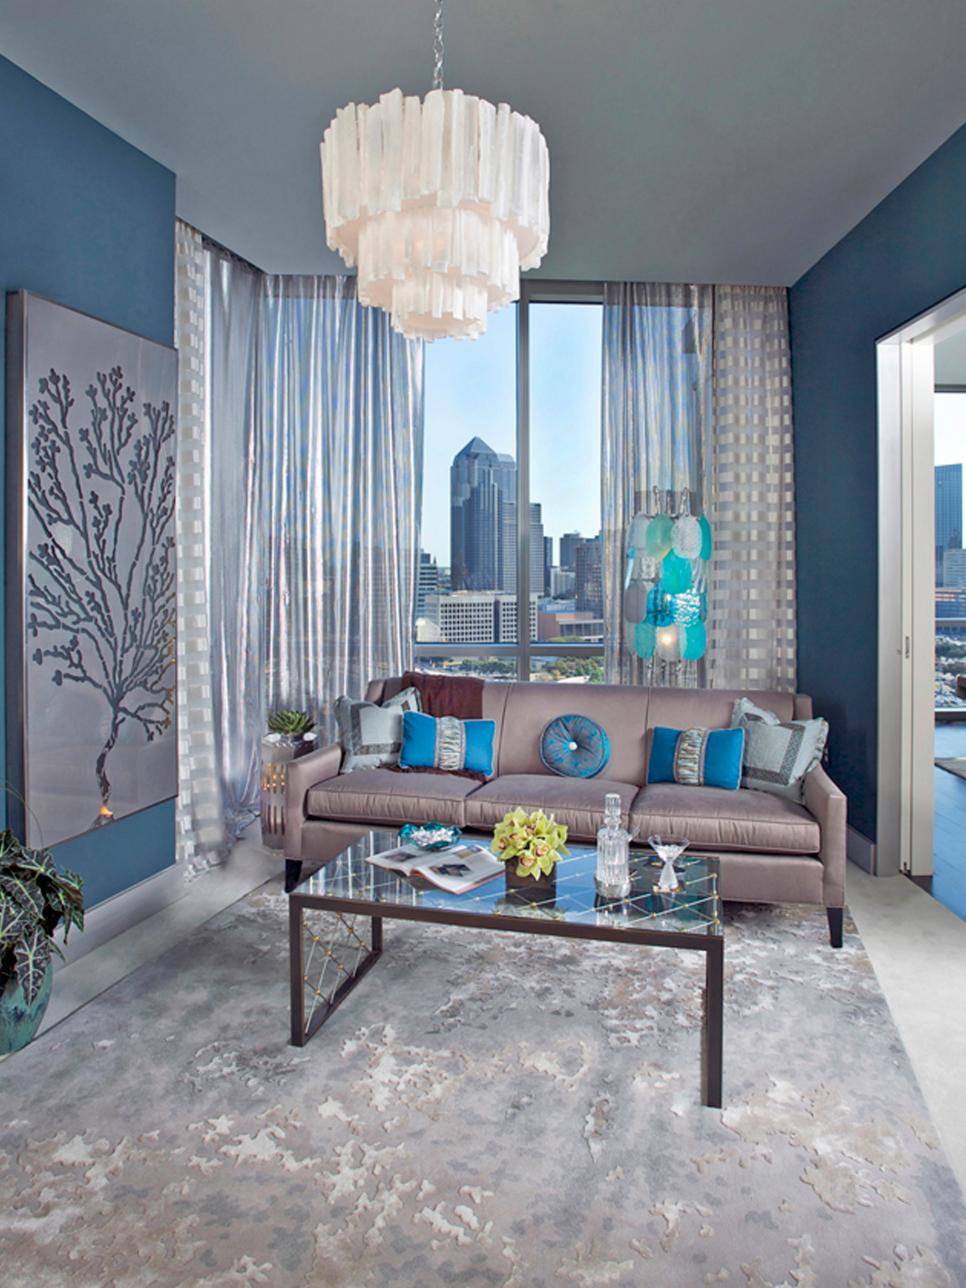 Blue and Gray Contemporary Living Room With White Chandelier